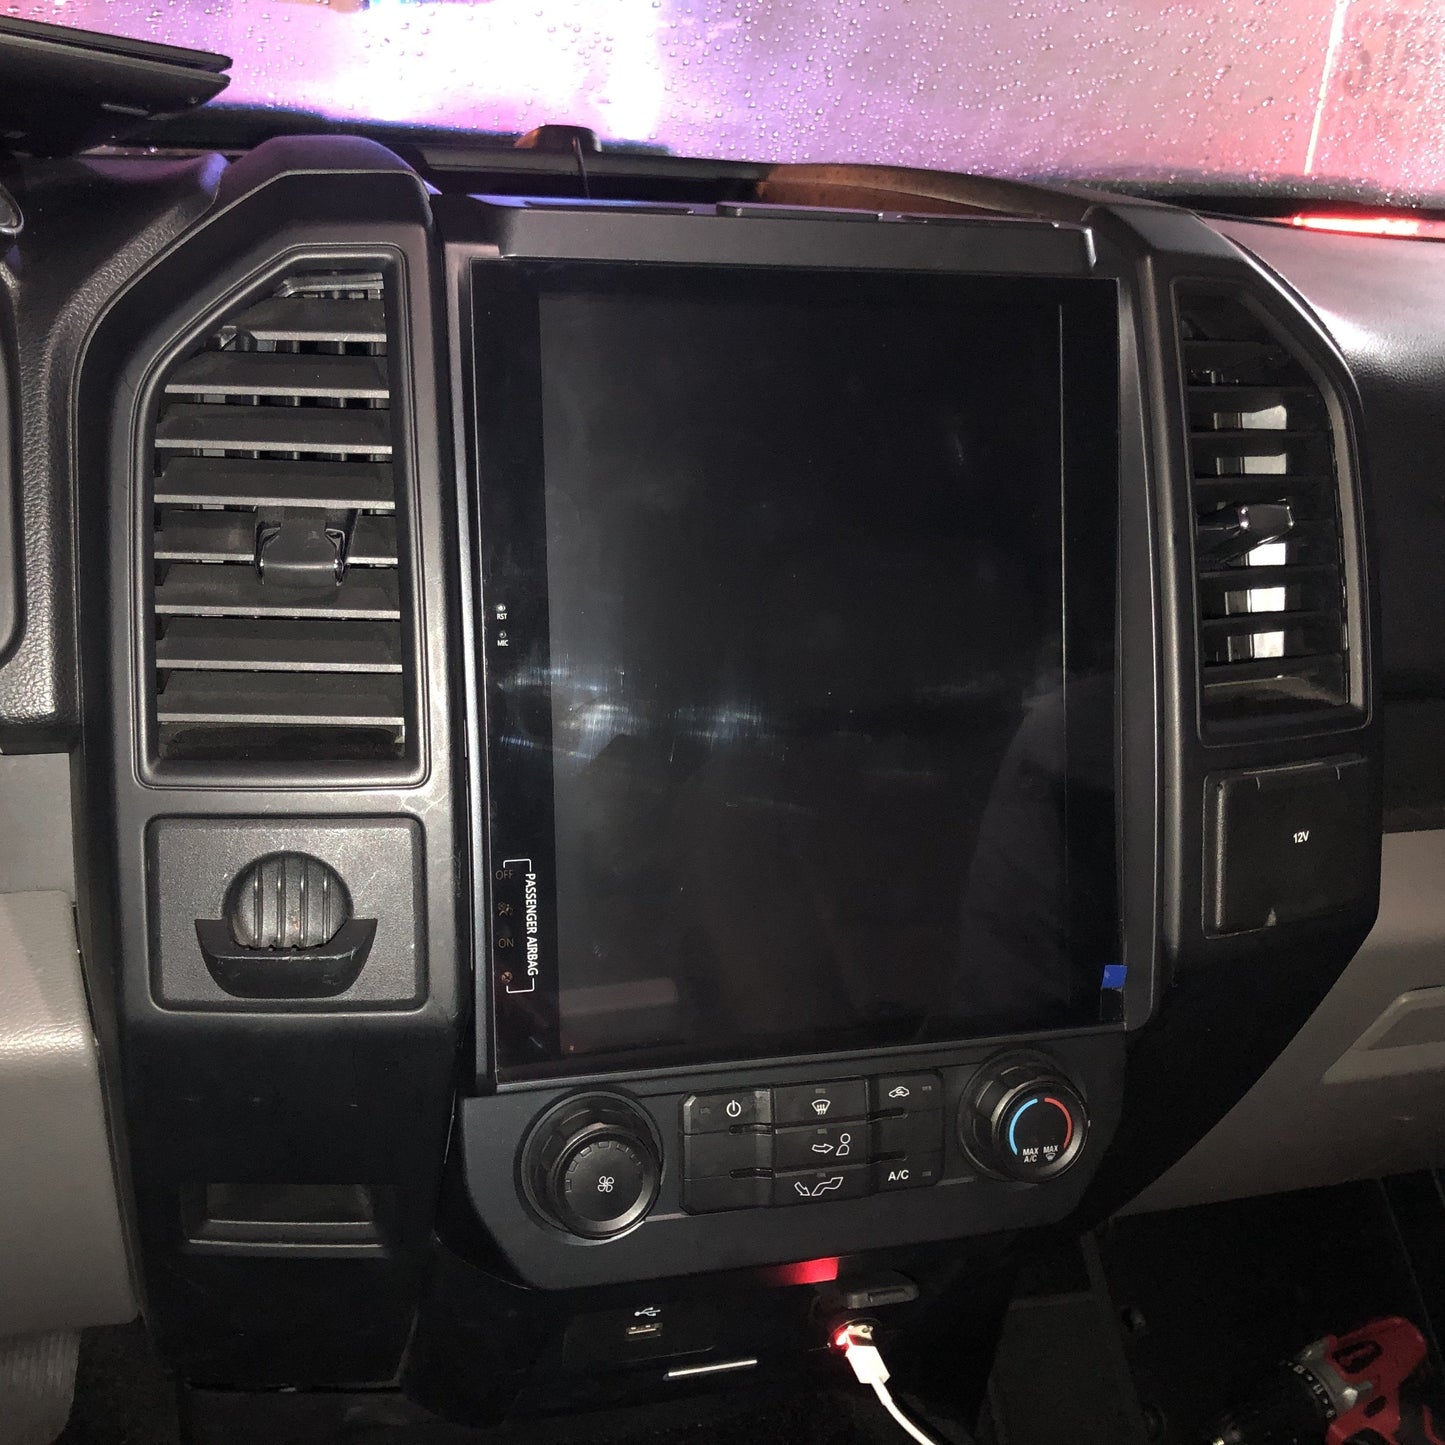 [Open box] 12.1" Android Vertical Screen Navigation Radio for Ford F-150 F-250 F-350 2015 - 2019-Phoenix Automotive